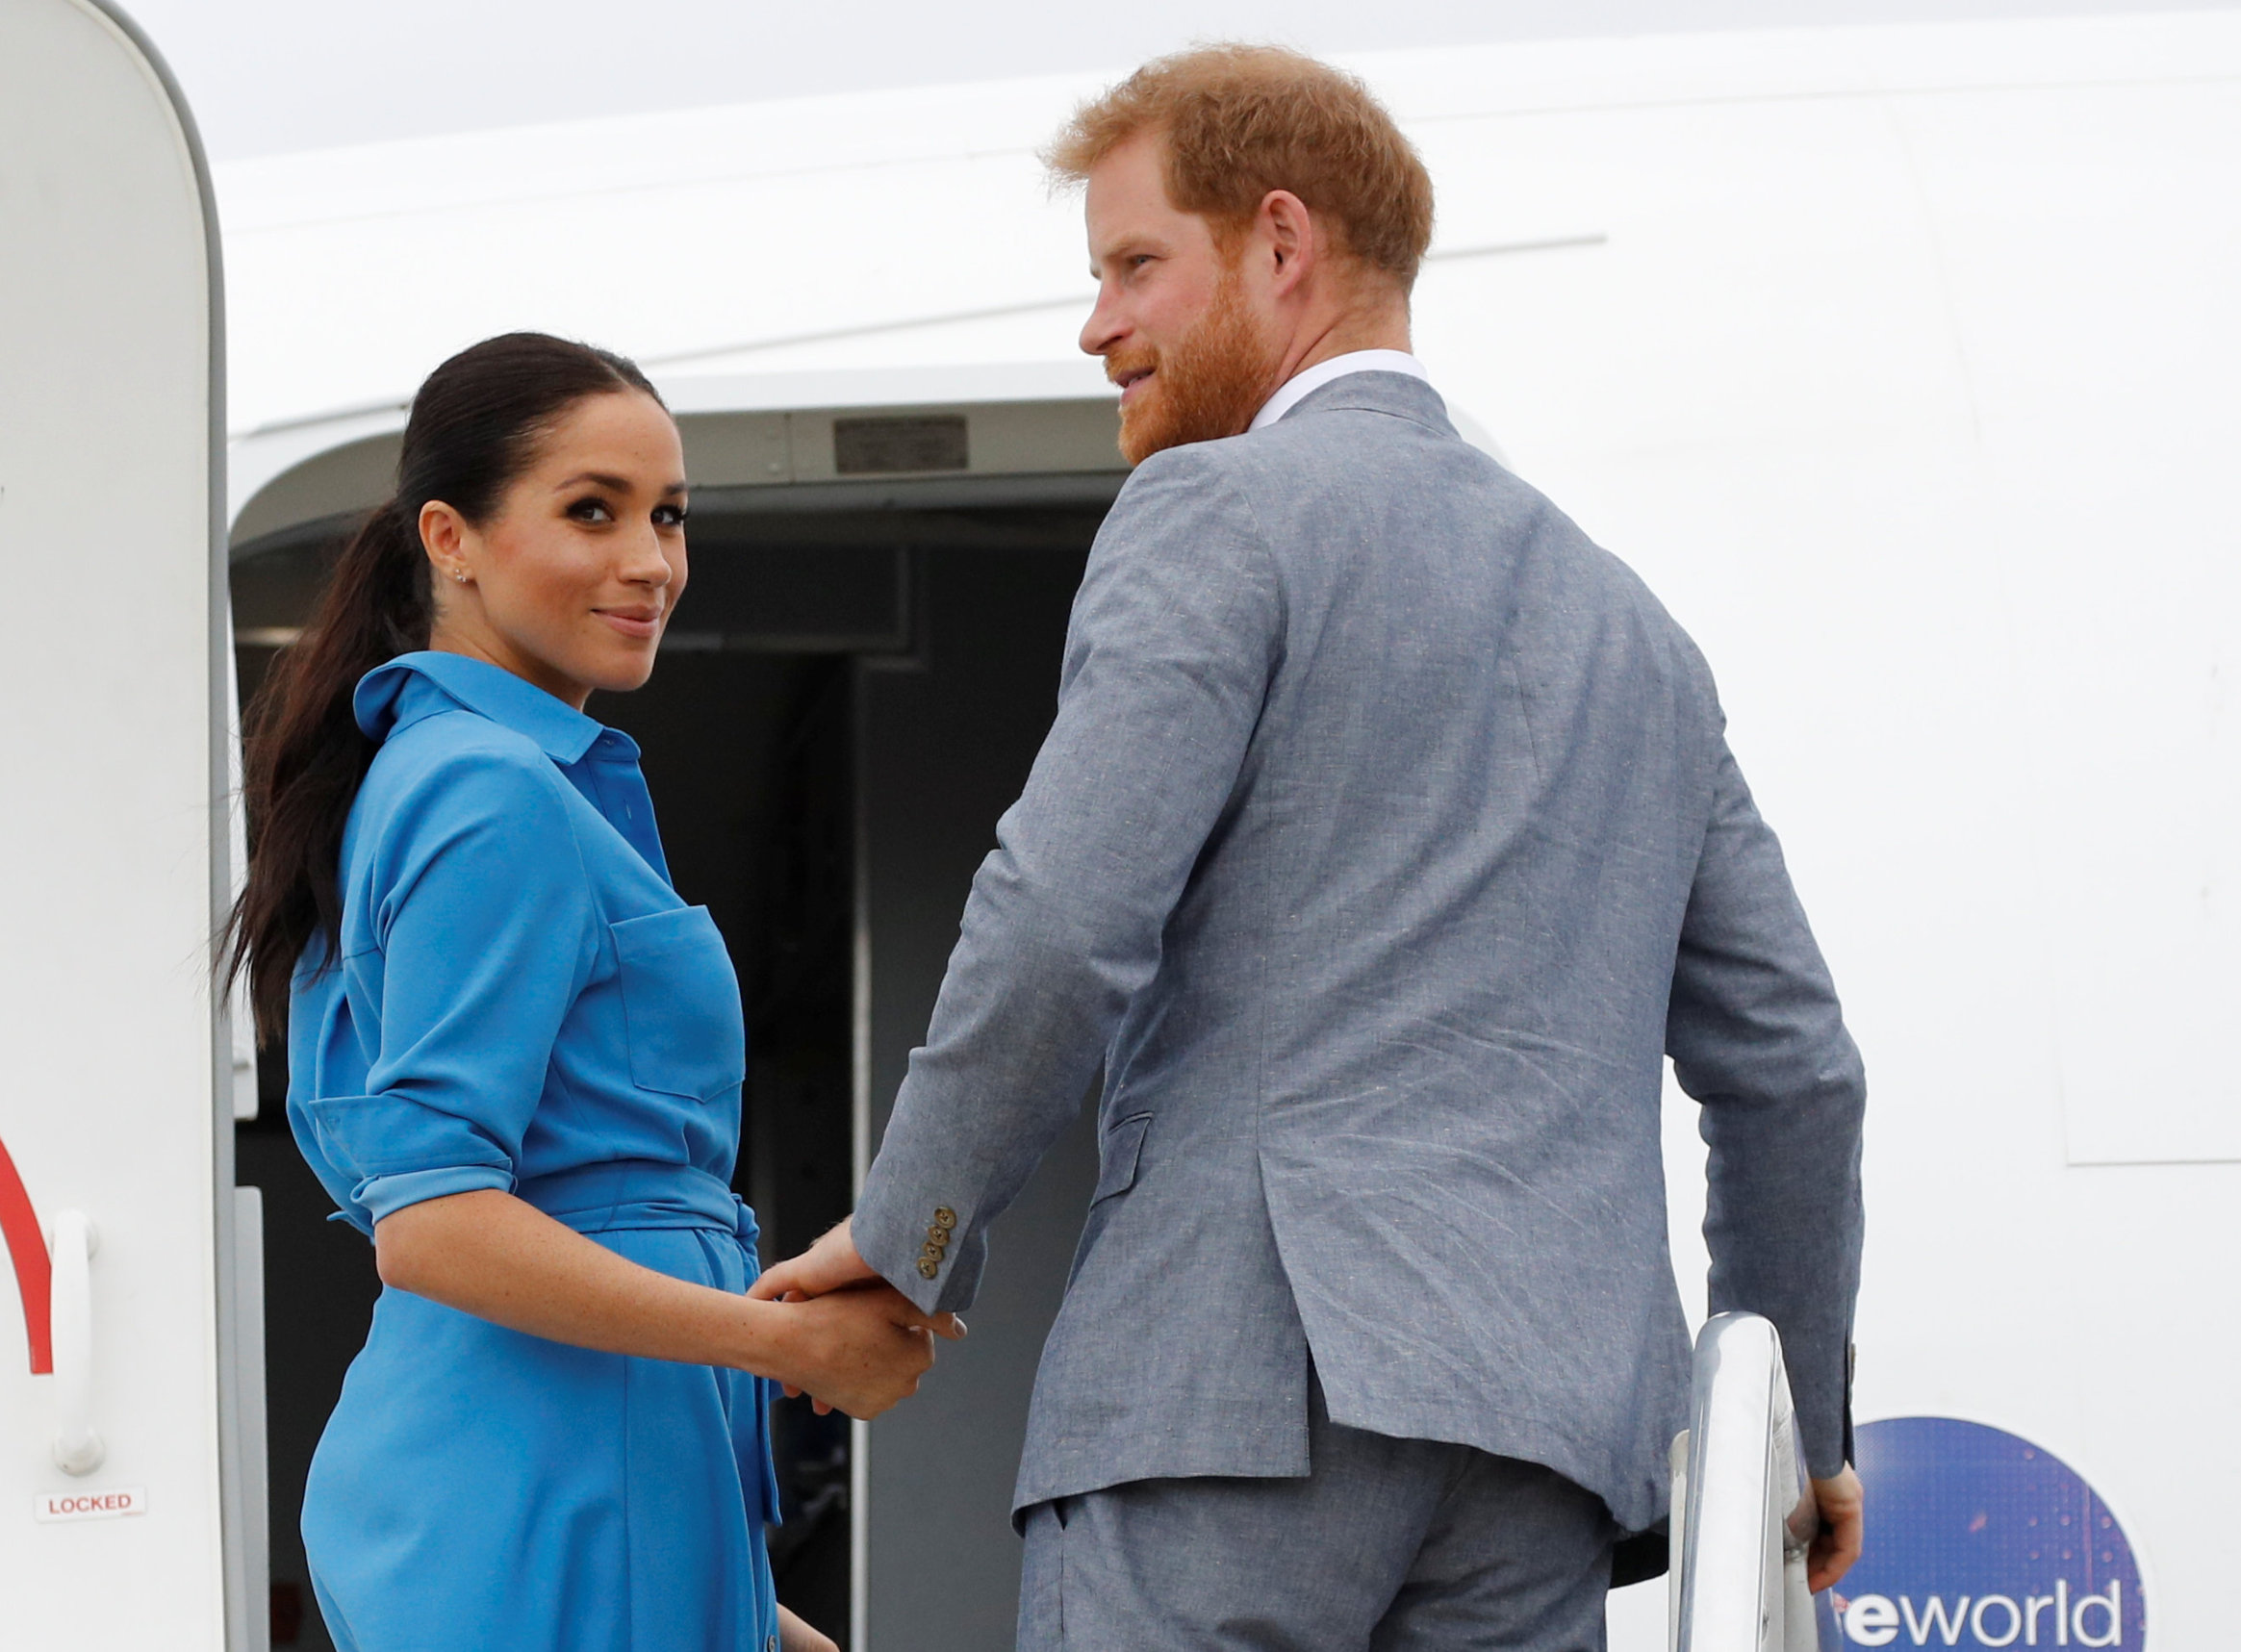 FUA,AMOTU, TONGA - OCTOBER 26: Prince Harry, Duke of Sussex and Meghan, Duchess of Sussex walk together, ahead of Tonga's Princess Angelika, as they depart from Fua'amotu International Airport on October 26, 2018 in Fua'amotu, Tonga. (Photo by Phil Noble - Pool/Getty Images)